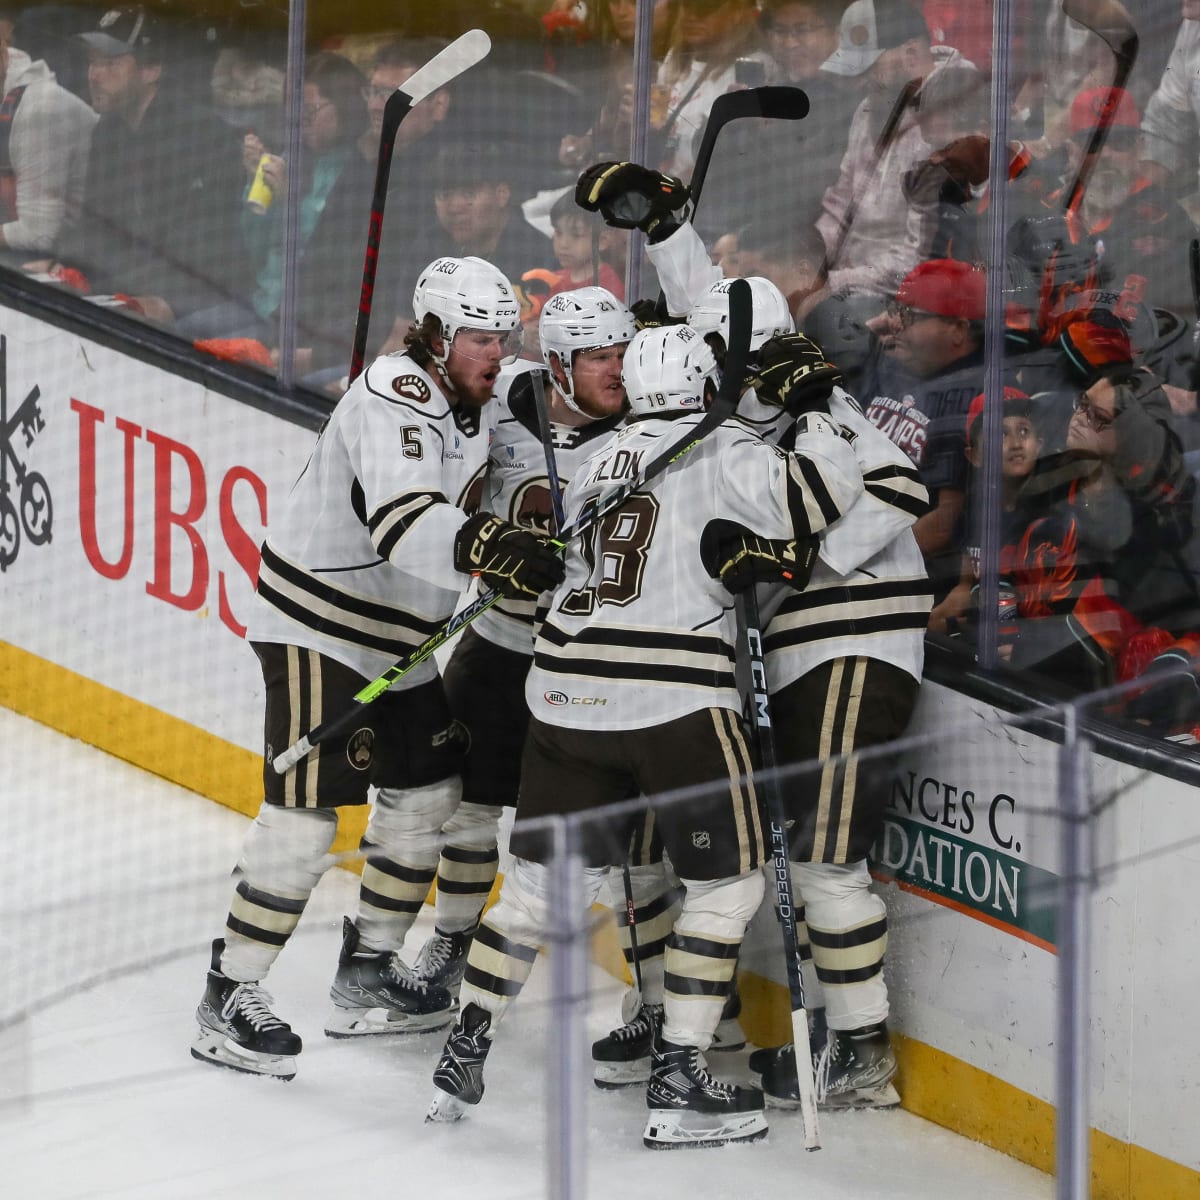 Hershey Bears to face Coachella Valley in Calder Cup Finals